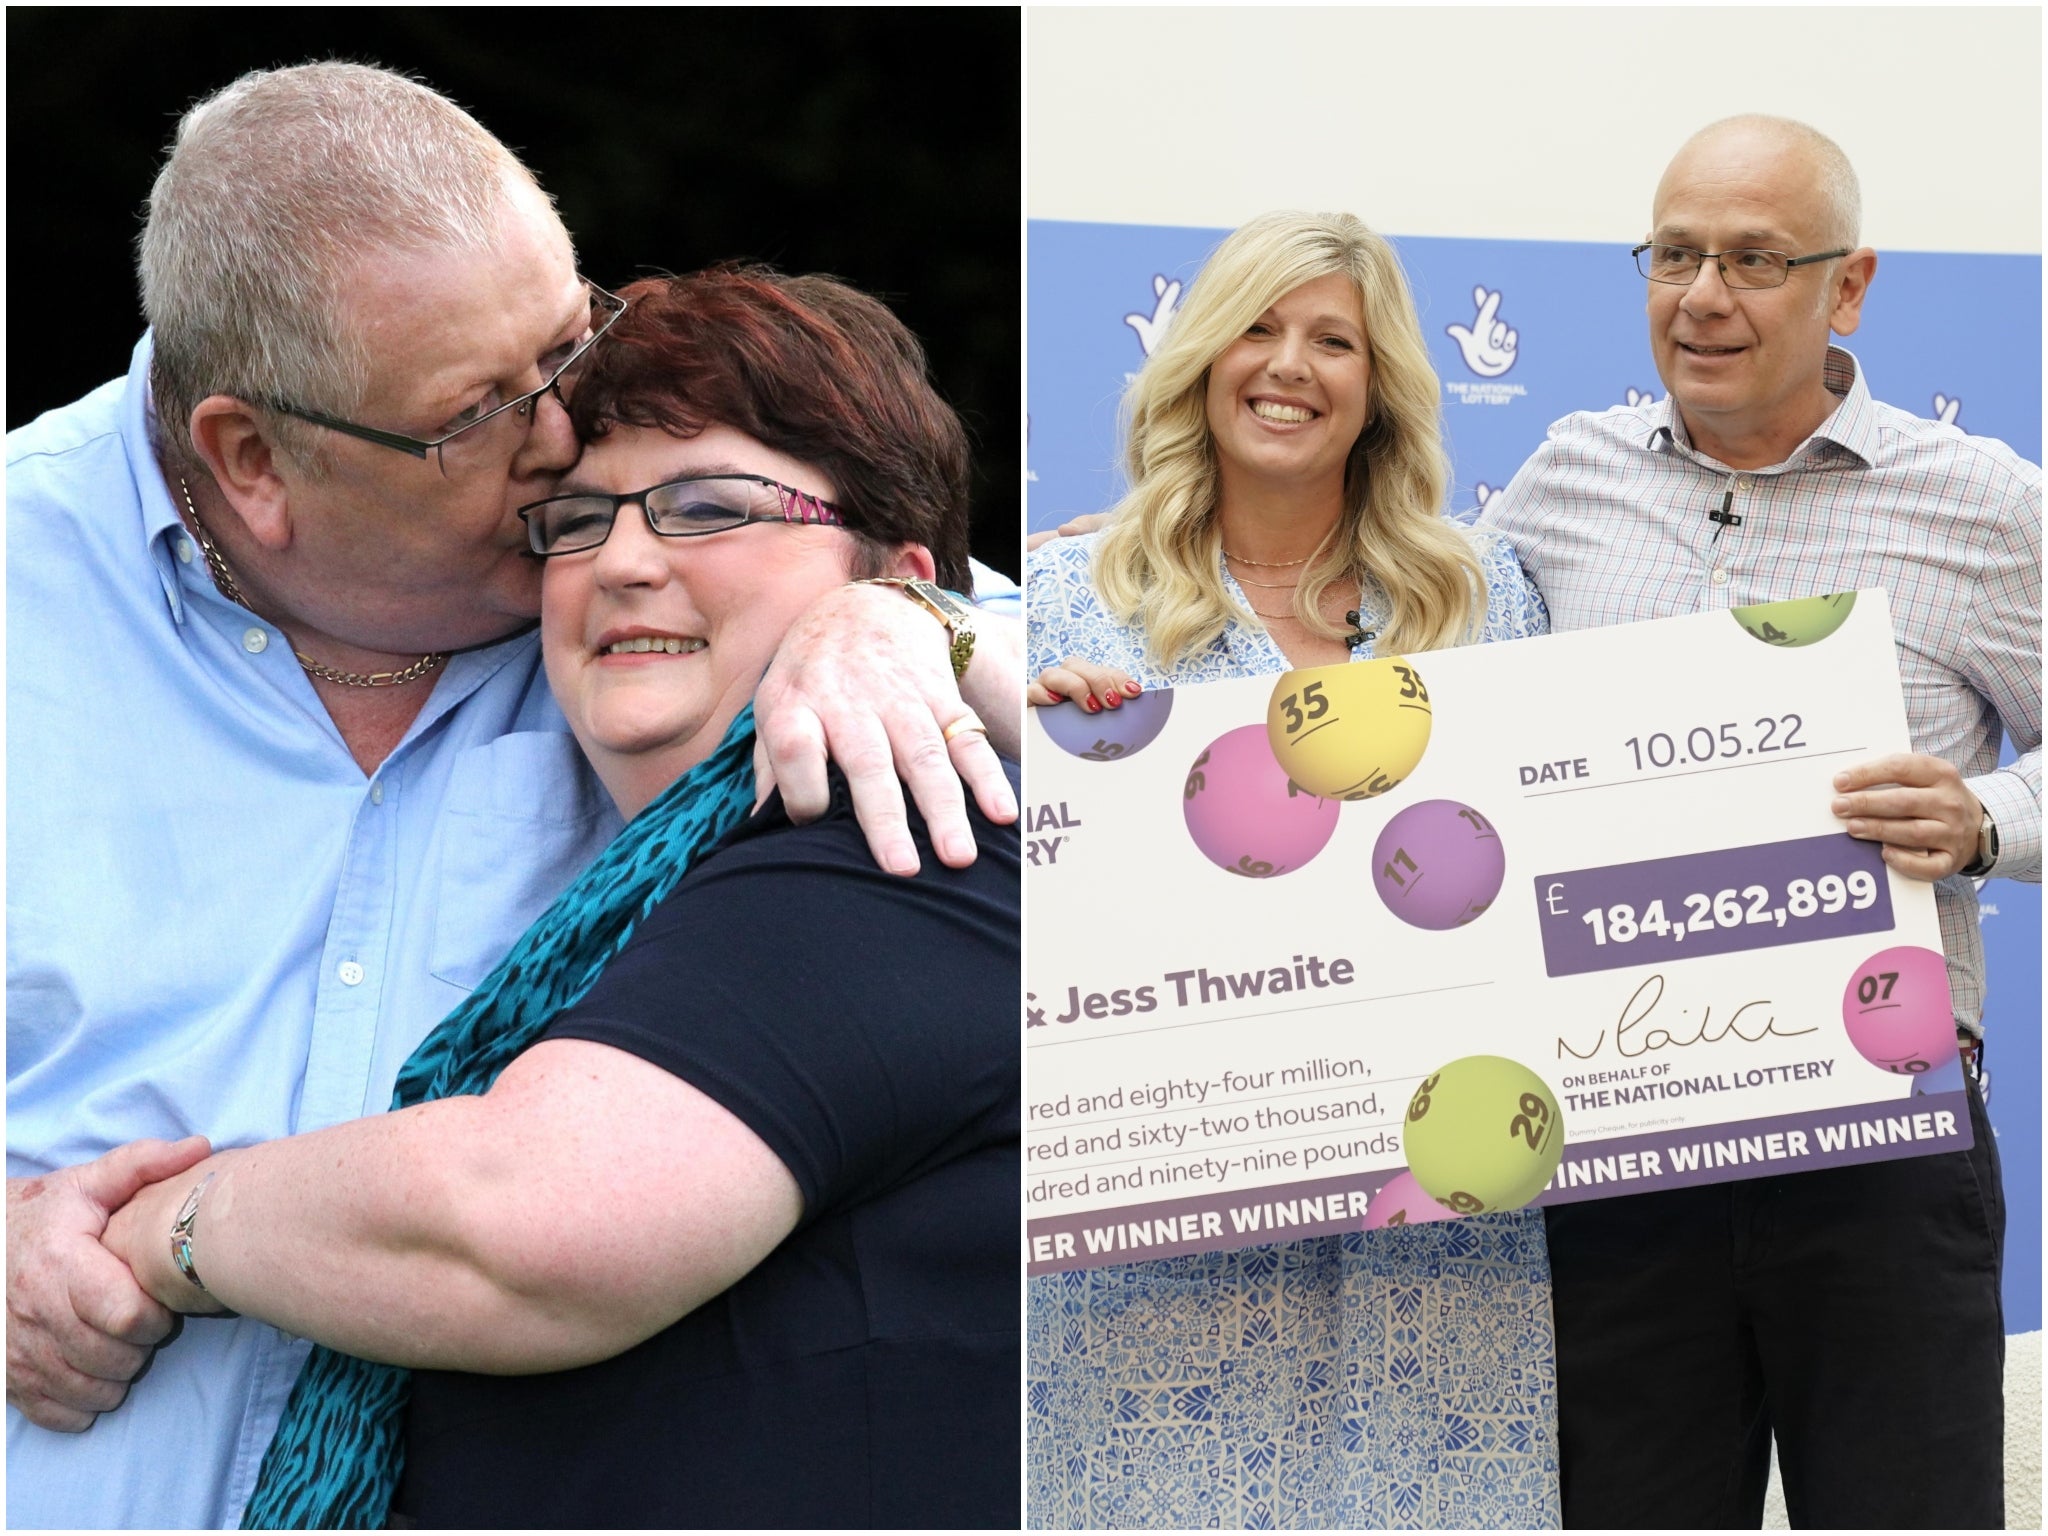 Colin and Chris Weir after their £161 million win in 2011 (left), and Joe and Jess Thwaite after their £184 million win in 2022 (right)